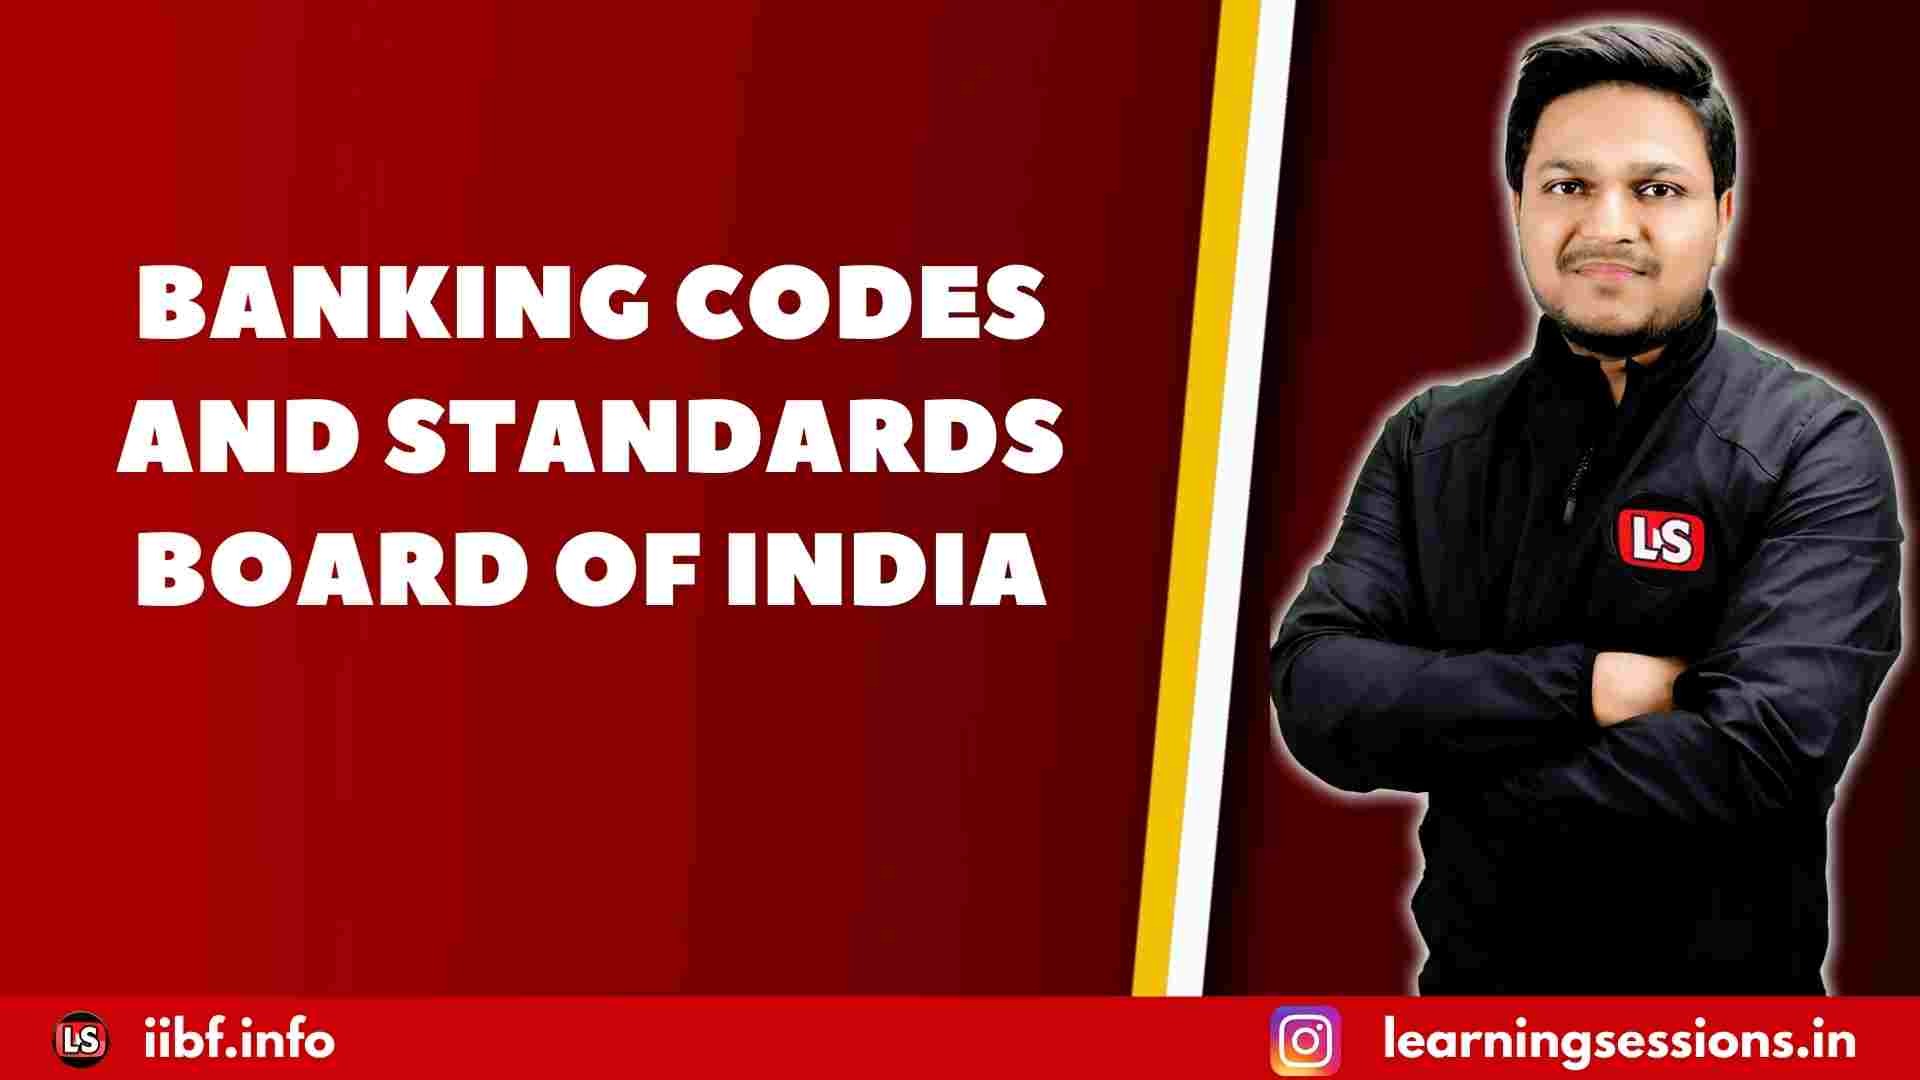 BANKING CODES AND STANDARDS BOARD OF INDIA